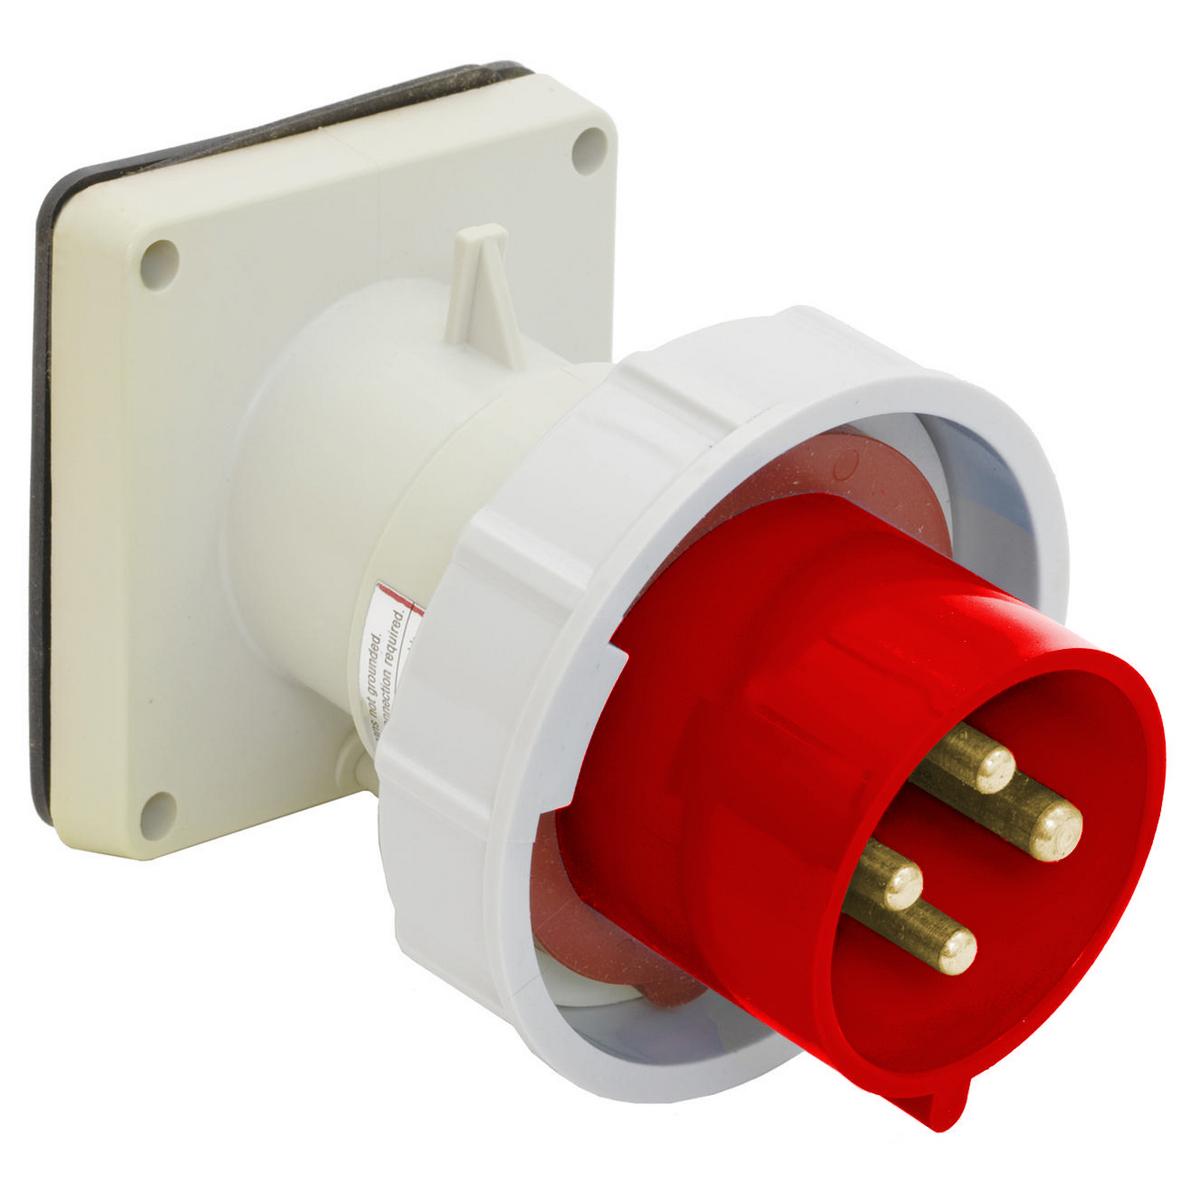 Hubbell 560B7W Heavy Duty Products, IEC Pin and Sleeve Devices, Industrial Grade, Male Flanged Inlet, 60A 3-Phase Wye 277/480V AC, 4- Pole 5-Wire Grounding, Screw Terminals, Red, Watertight  ; Watertight